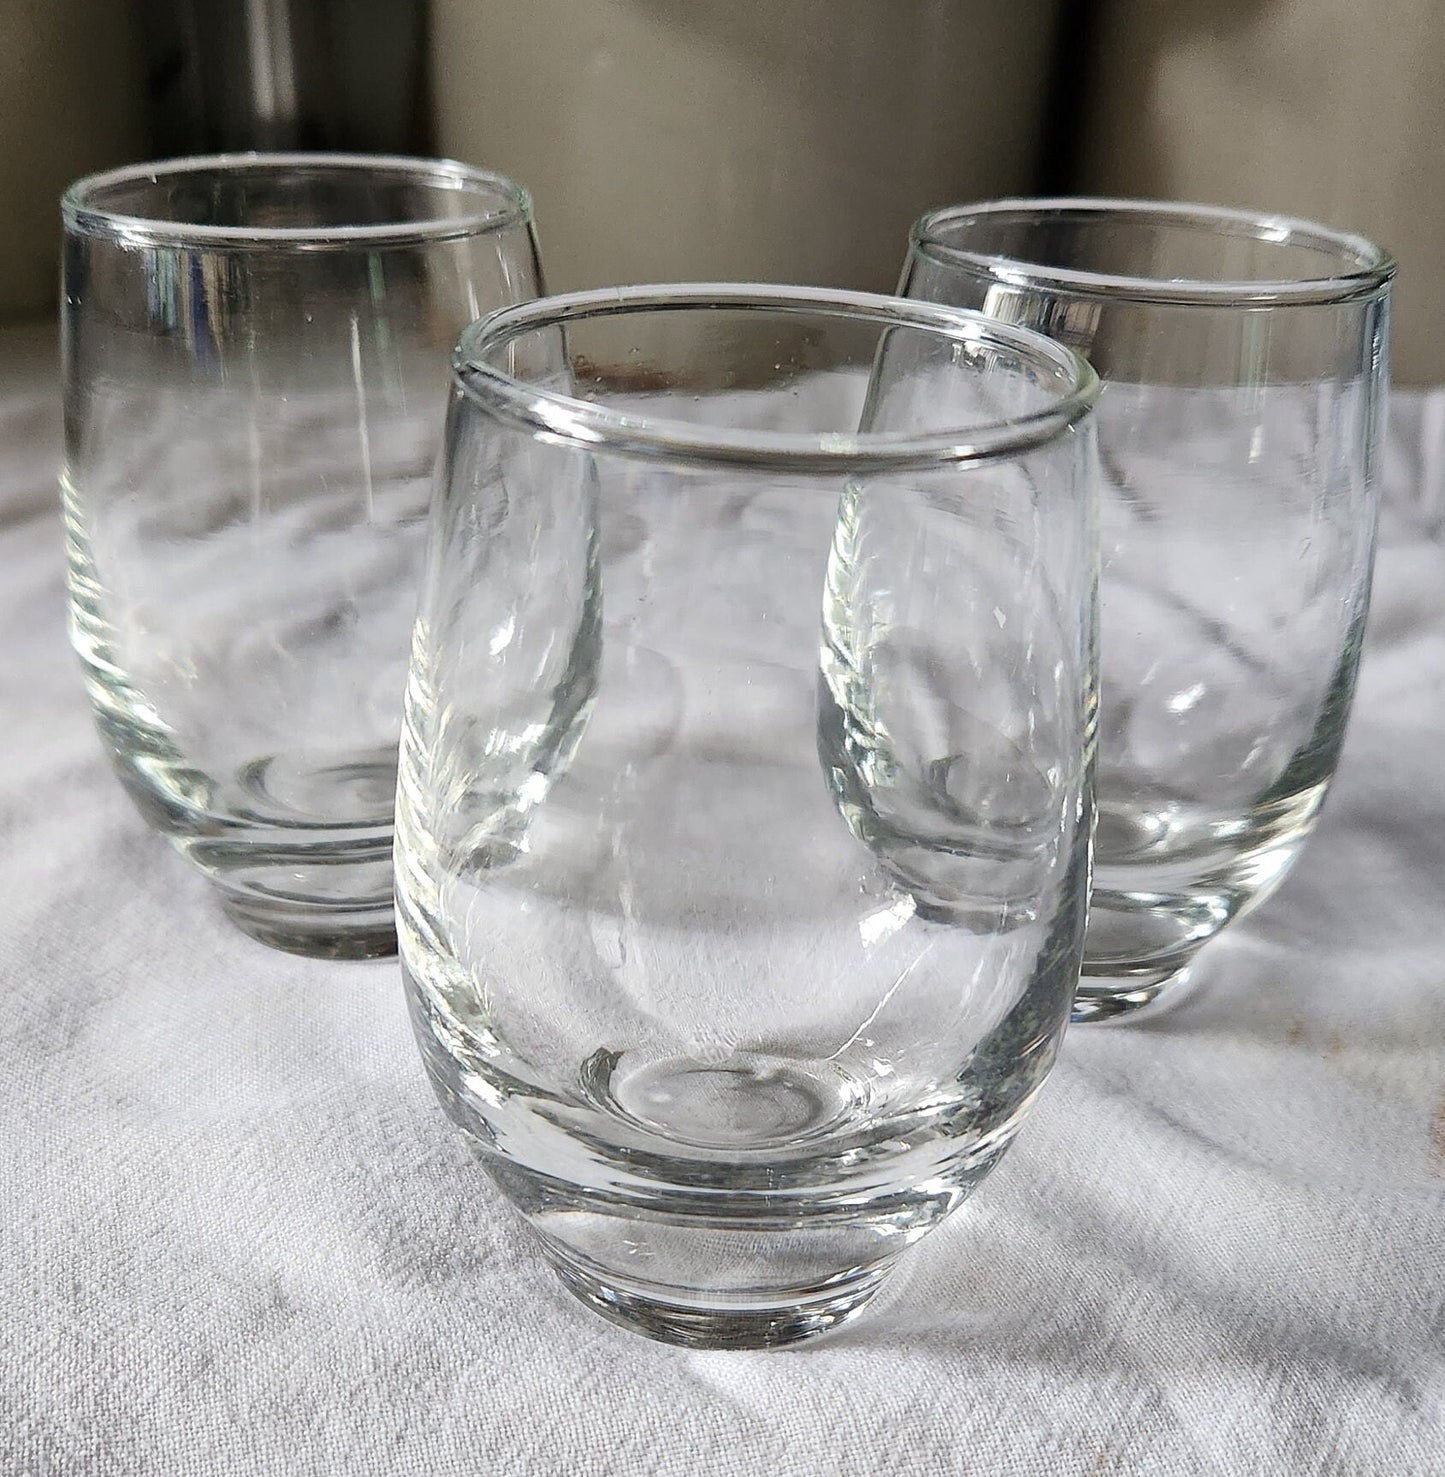 Vintage Roly Poly Tempo Glassware by Libbey - Set of 3